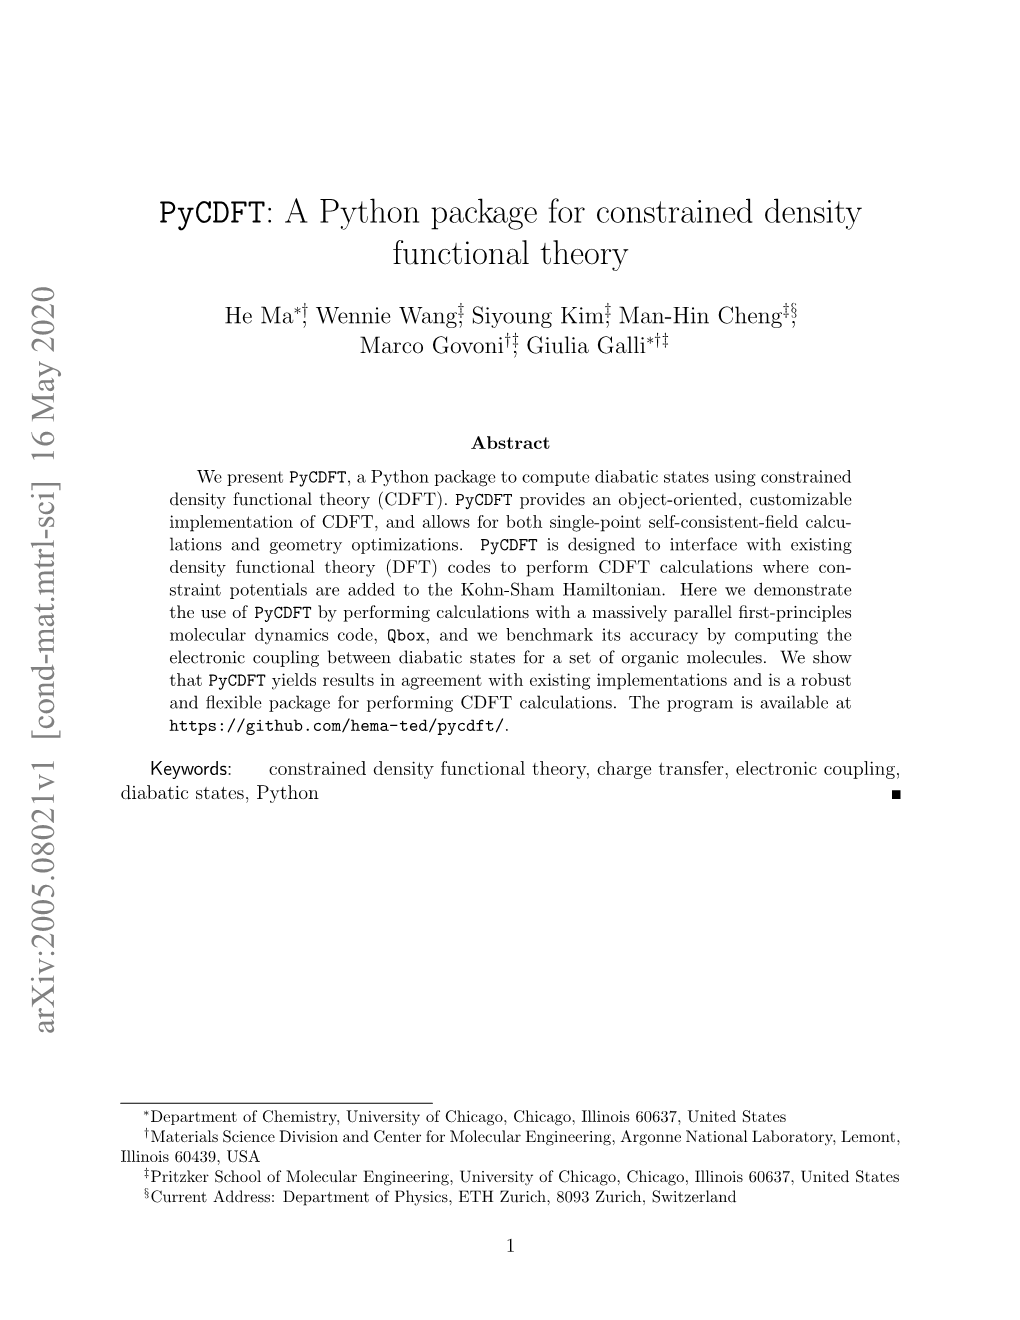 Pycdft: a Python Package for Constrained Density Functional Theory